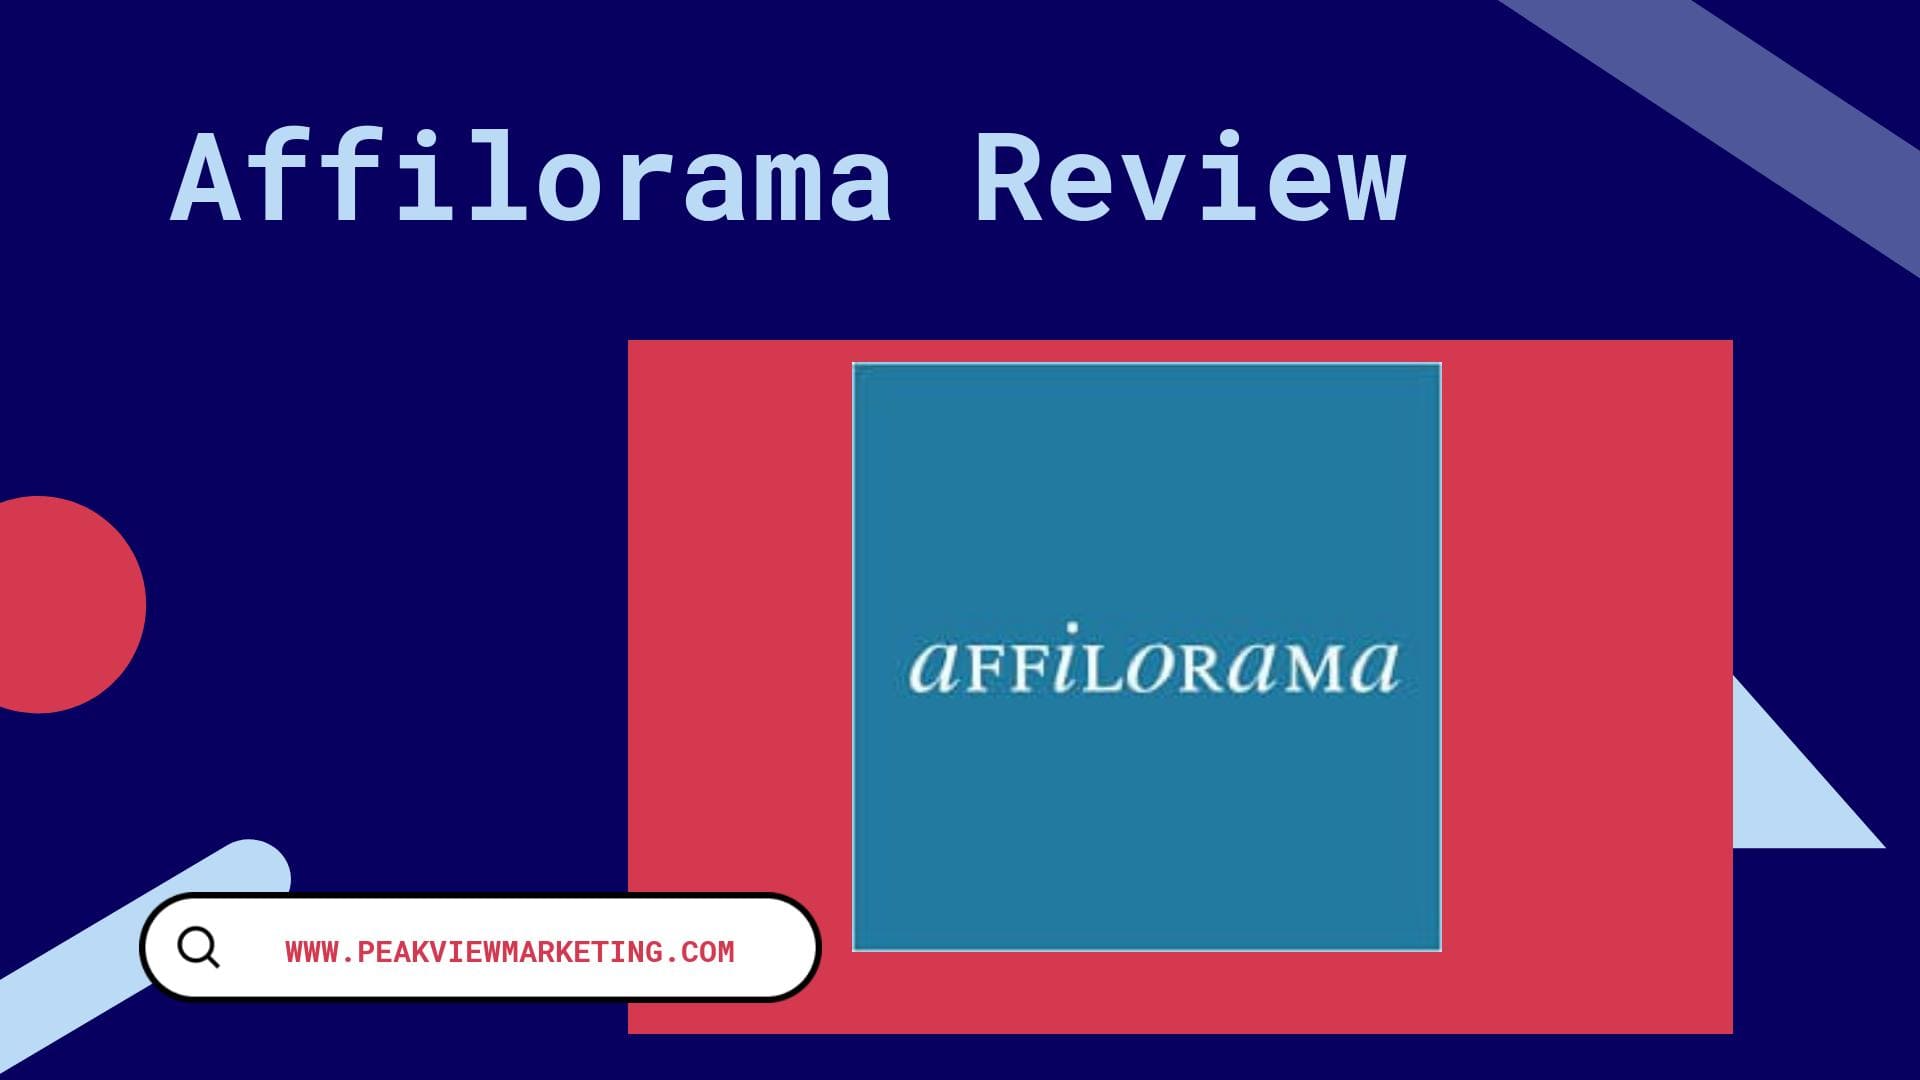 Affilorama Review Image